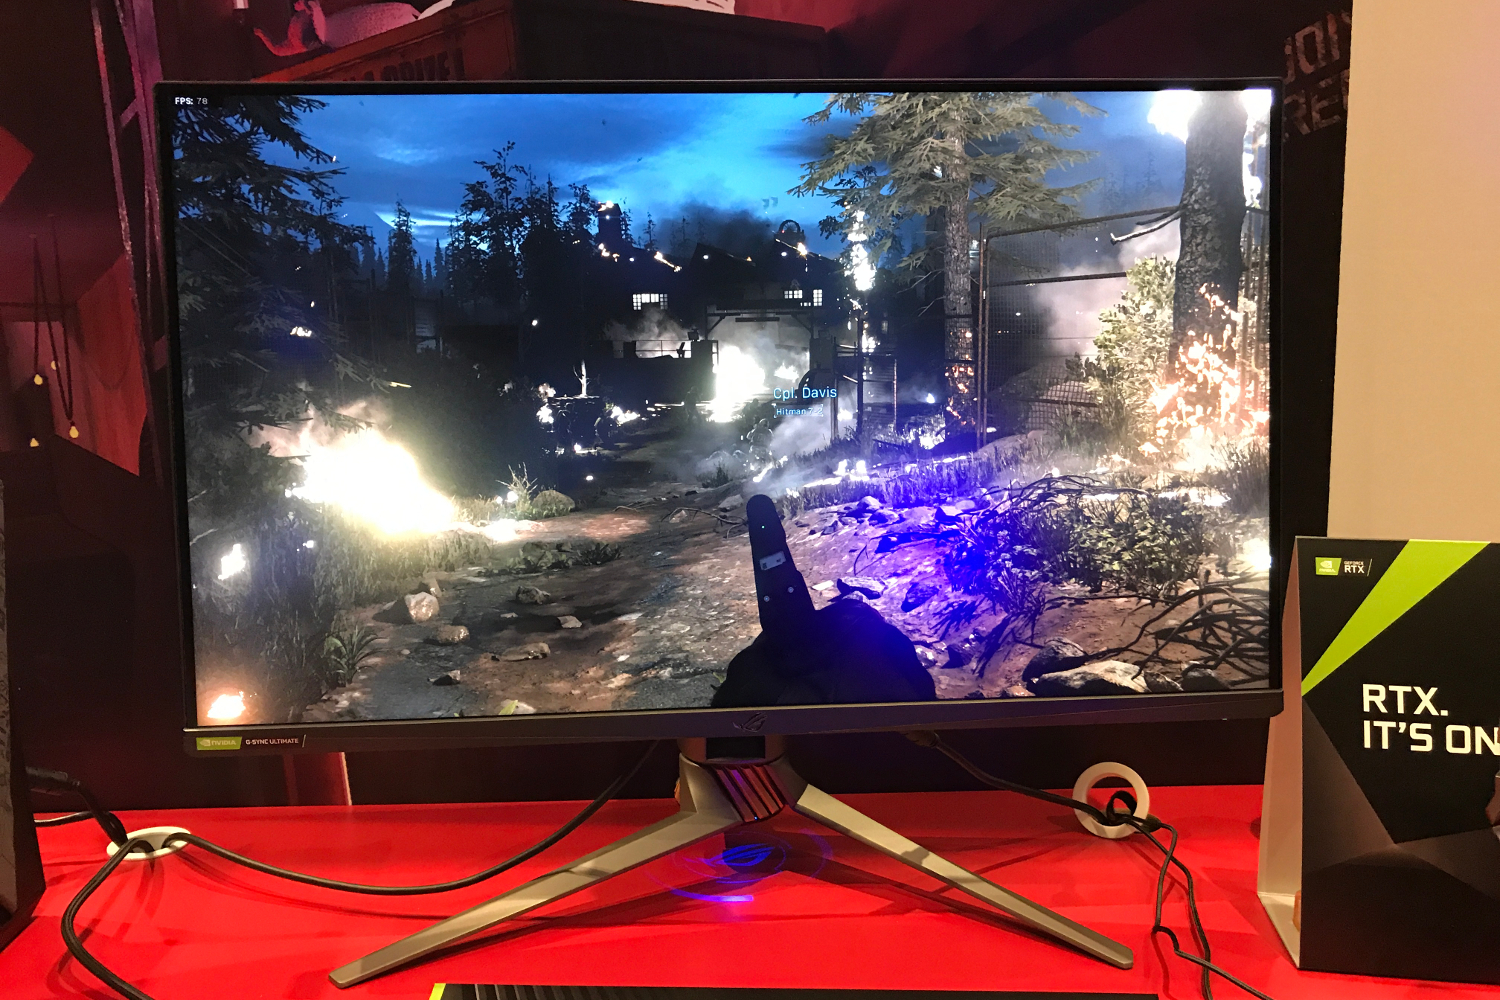 CES 2020: Asus have made the world's first 360Hz gaming monitor